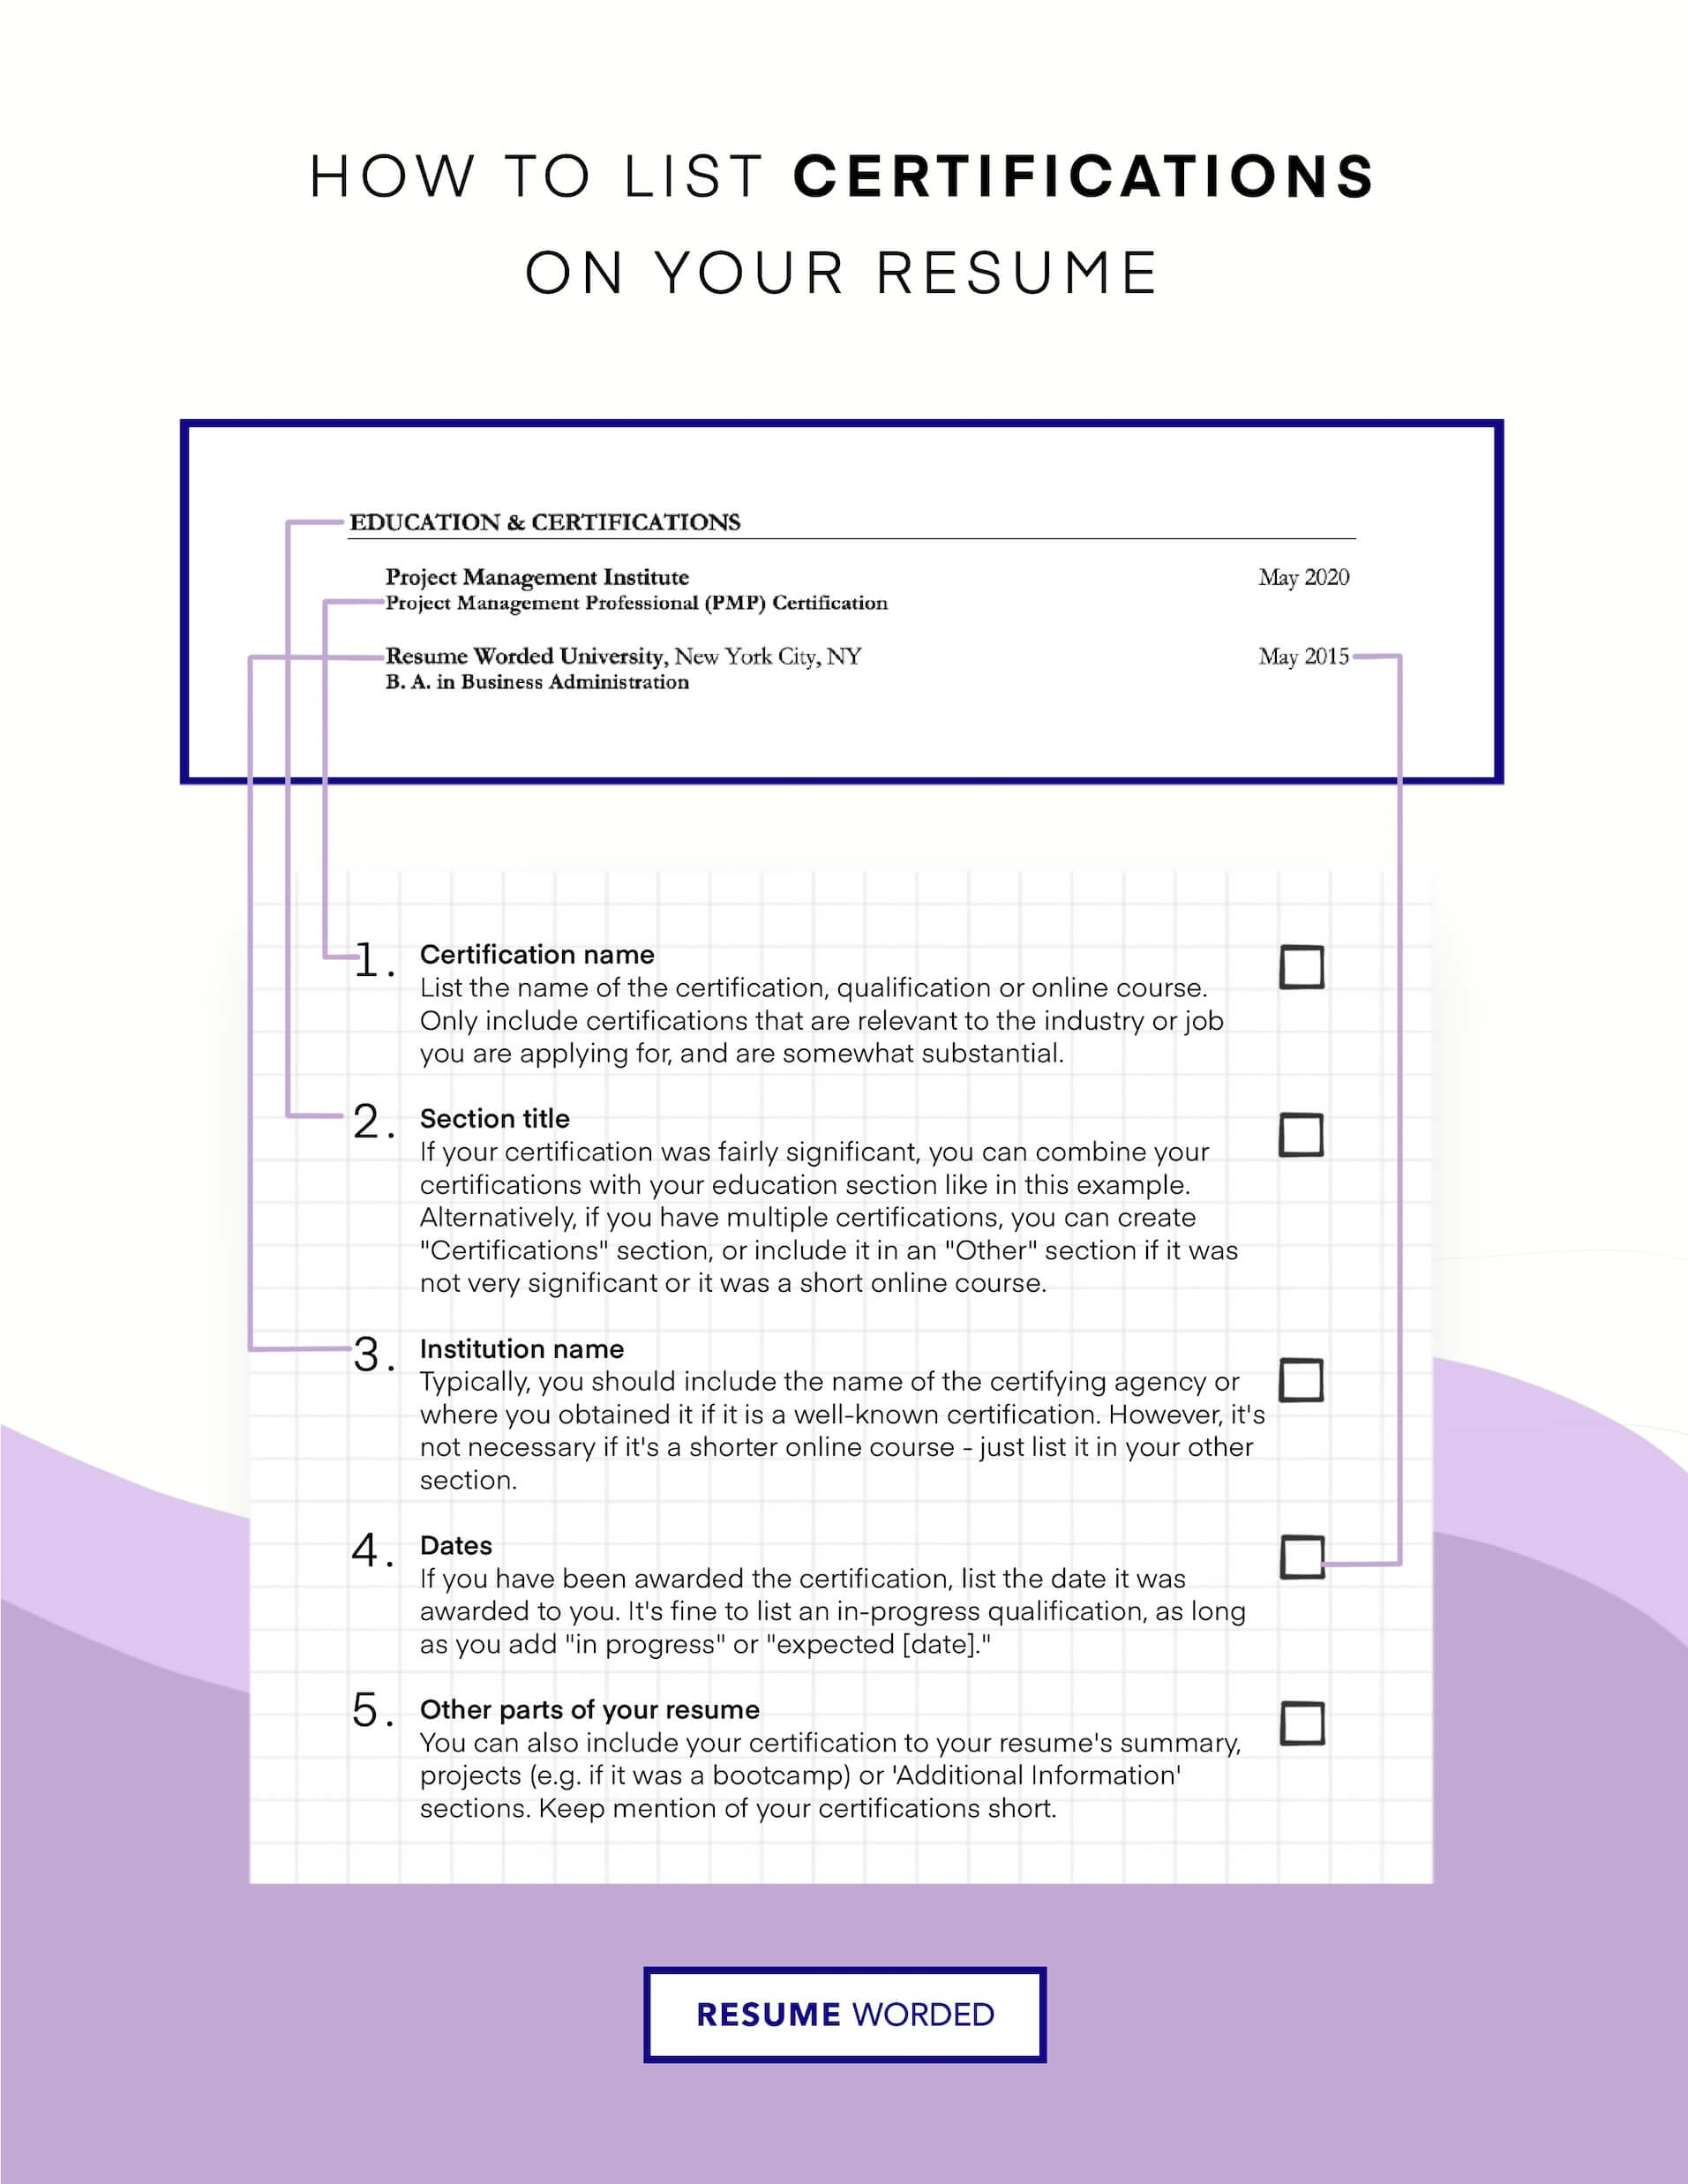 Highlight healthcare certification. - Healthcare Business Analyst Resume